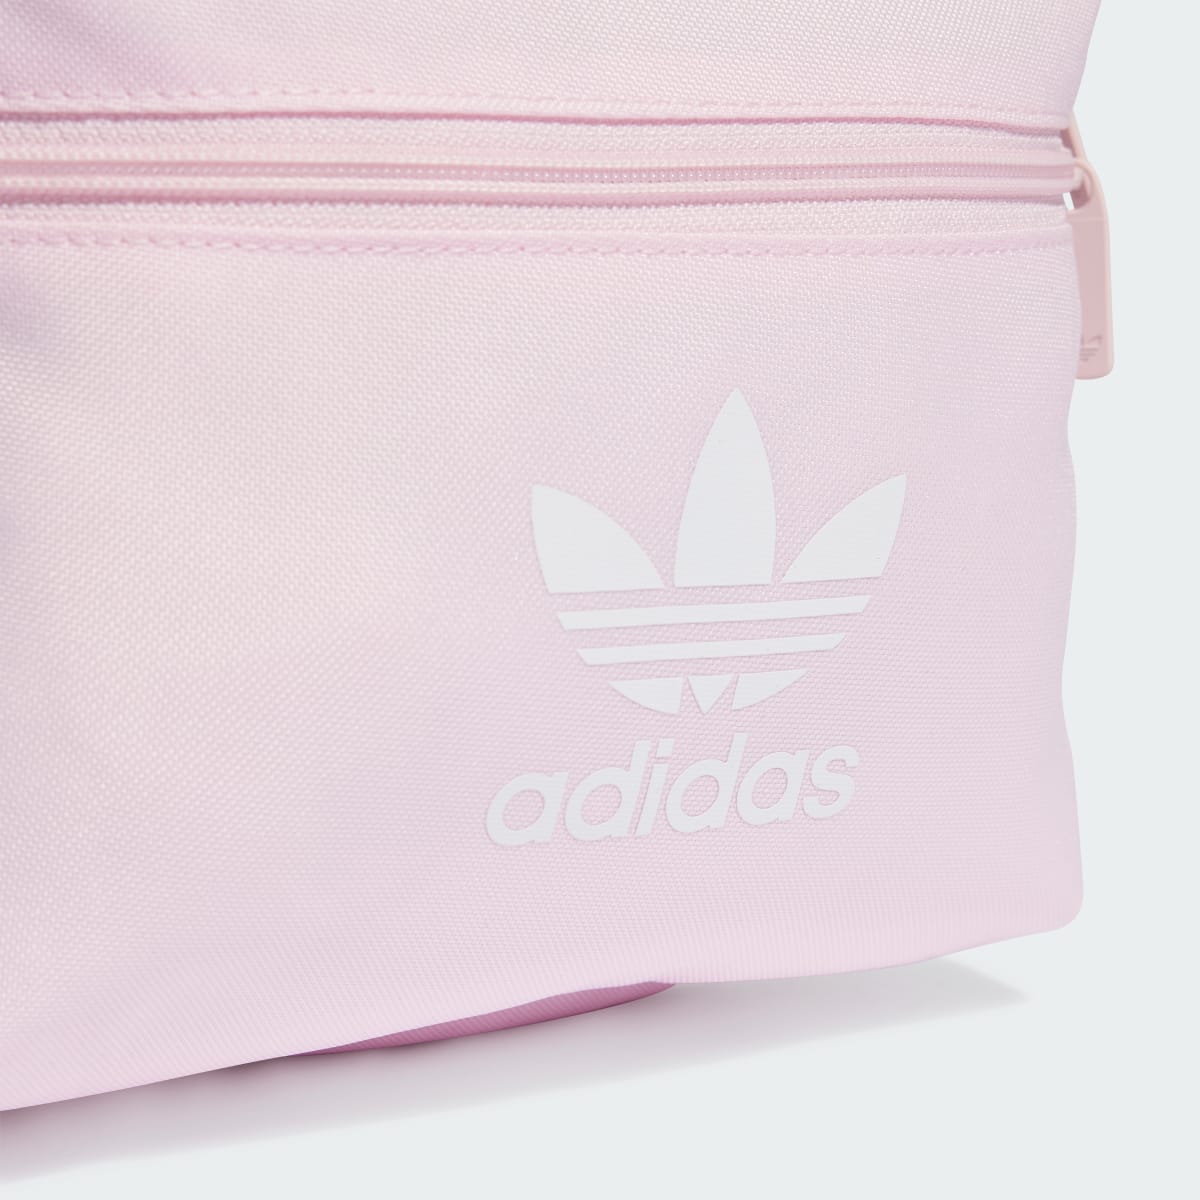 Adidas Small Adicolor Classic Backpack. 6